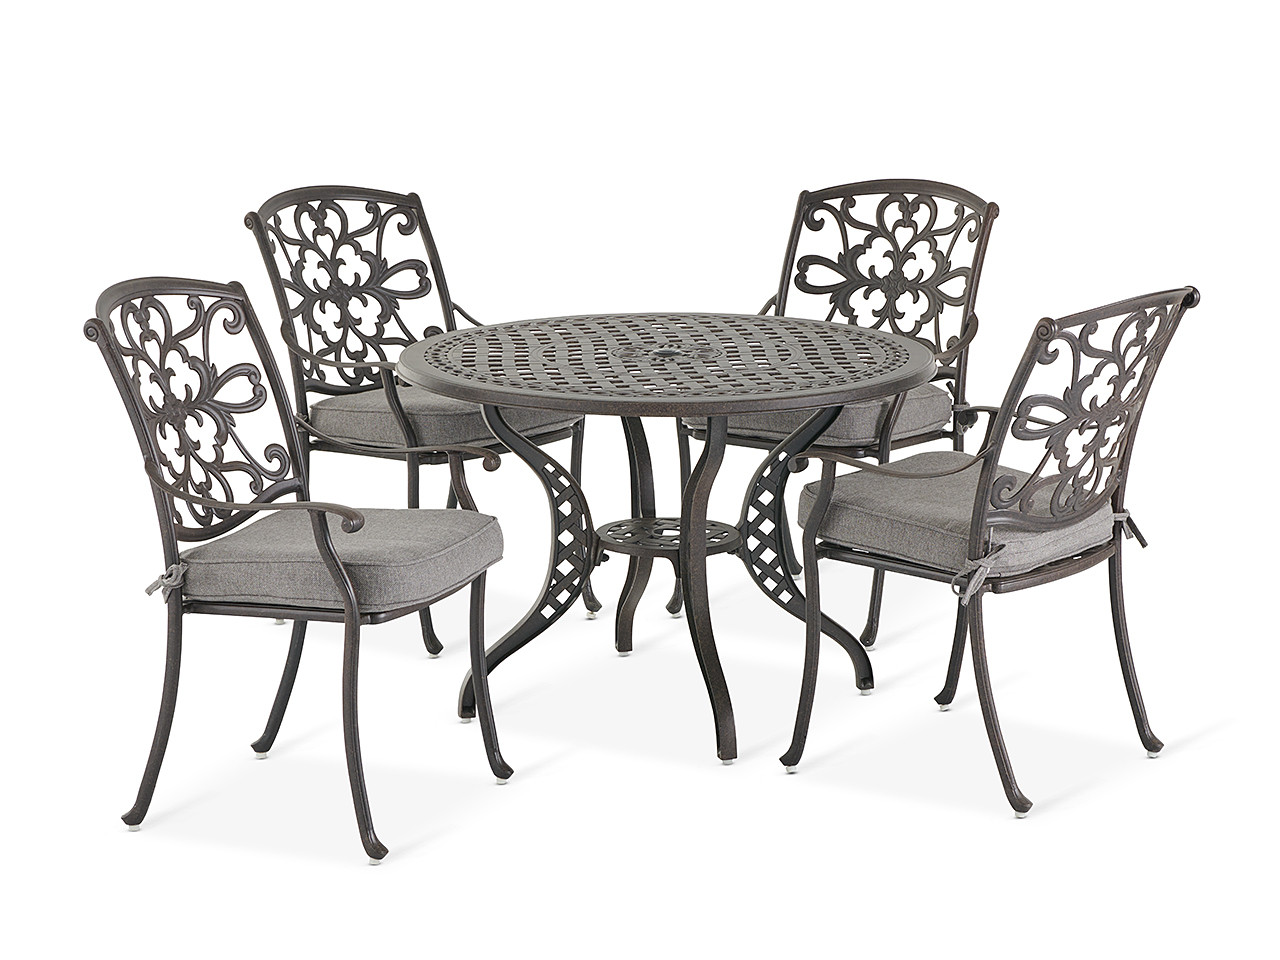 Carlisle Aged Bronze Cast Aluminum and Essential Granite Cushion 5 Pc. Dining Set with 42 in. D Table